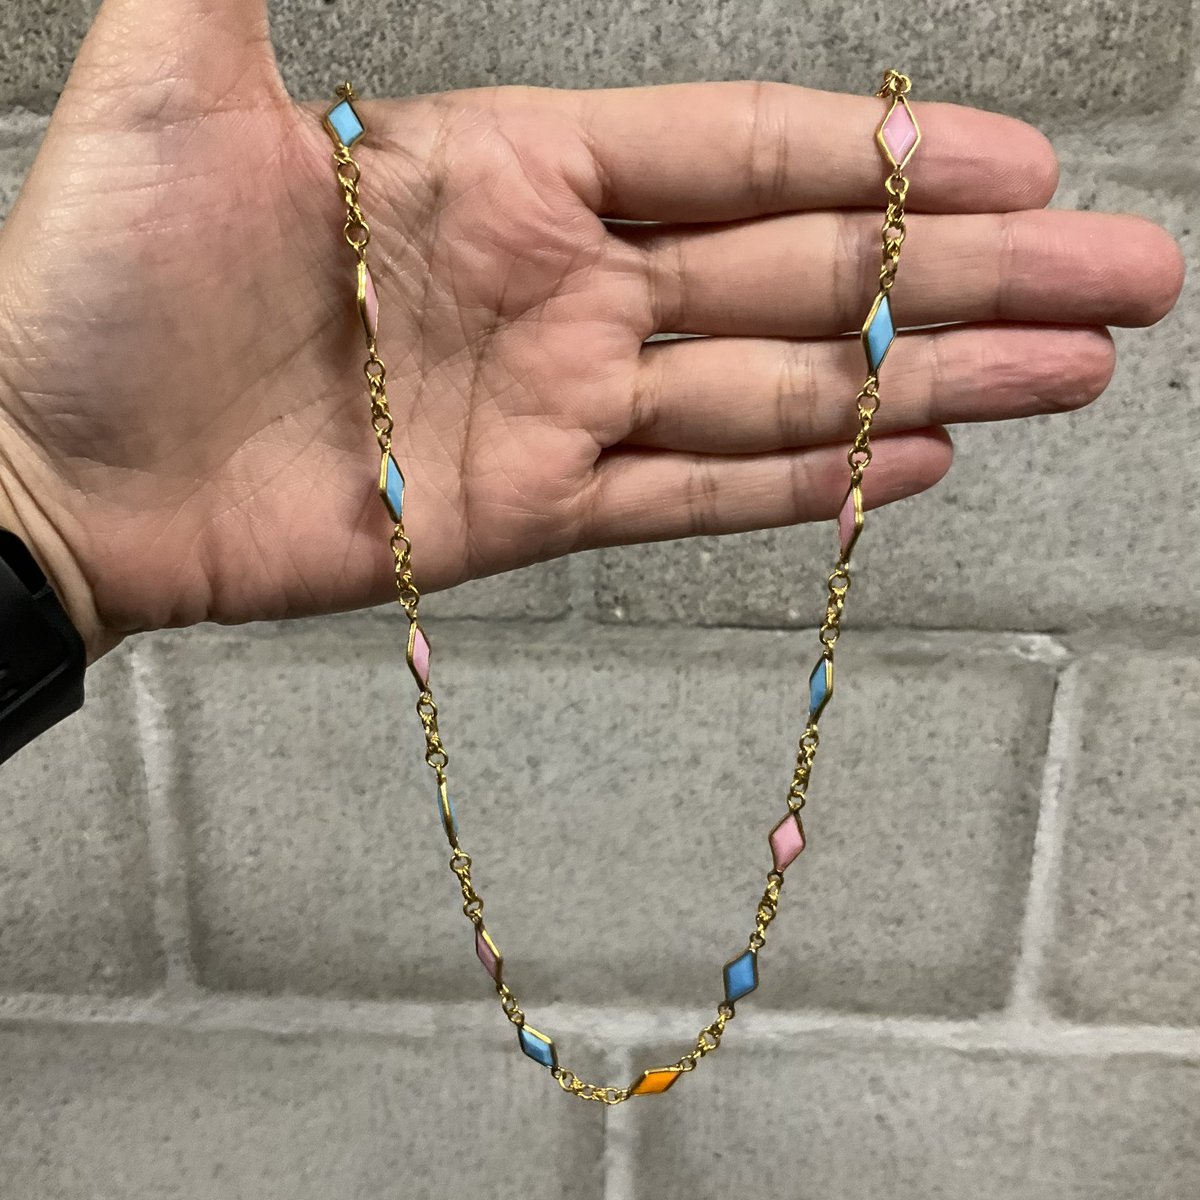 Available now! 18k gold necklace featuring pink, blue, and orange inlay stones! 20.5 inches long and weighs 18.2 grams. Take this beauty home for only $1999.99 but mention this post and take 20% off!   #pawnshop #oakland #bestcollateral #gold #goldnecklace #stonenecklace